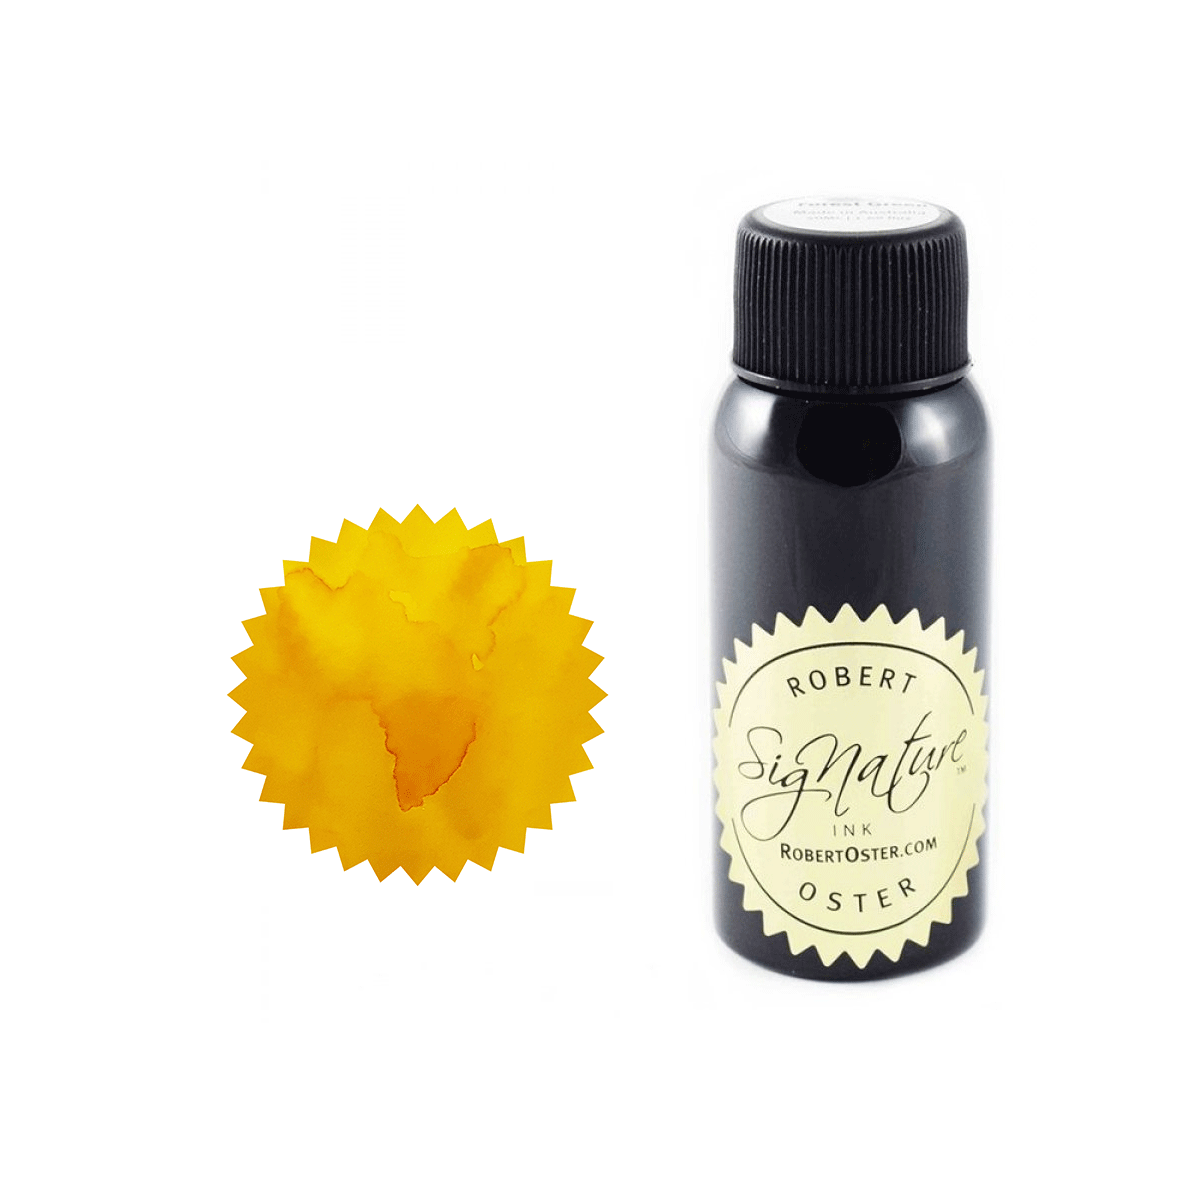 Robert Oster Signature Ink Bottle Yellow Sunrise - Pencraft the boutique